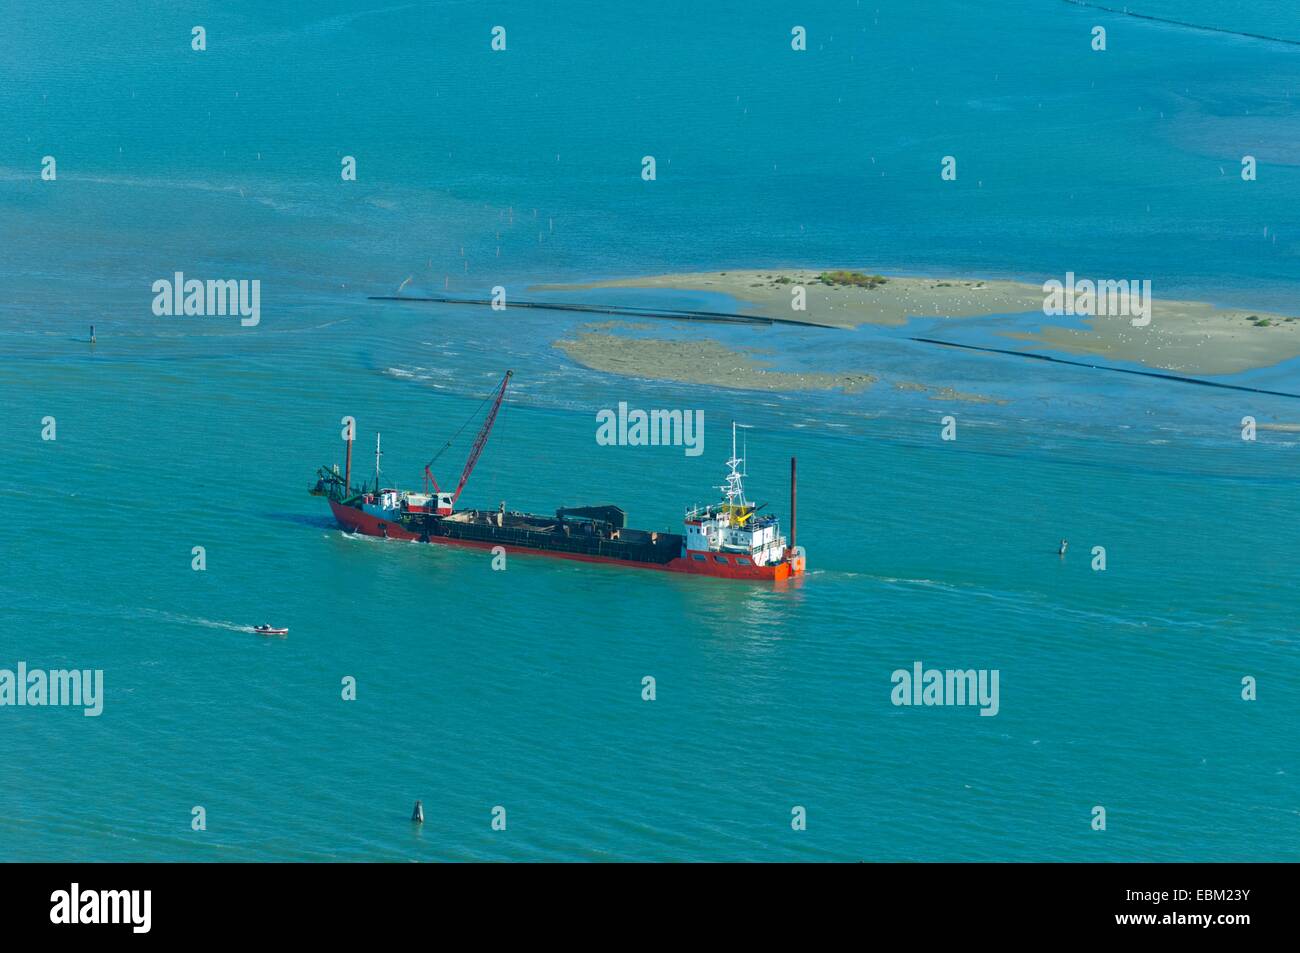 Aerial view of digging boat, Venice lagoon, Italy, Europe Stock Photo